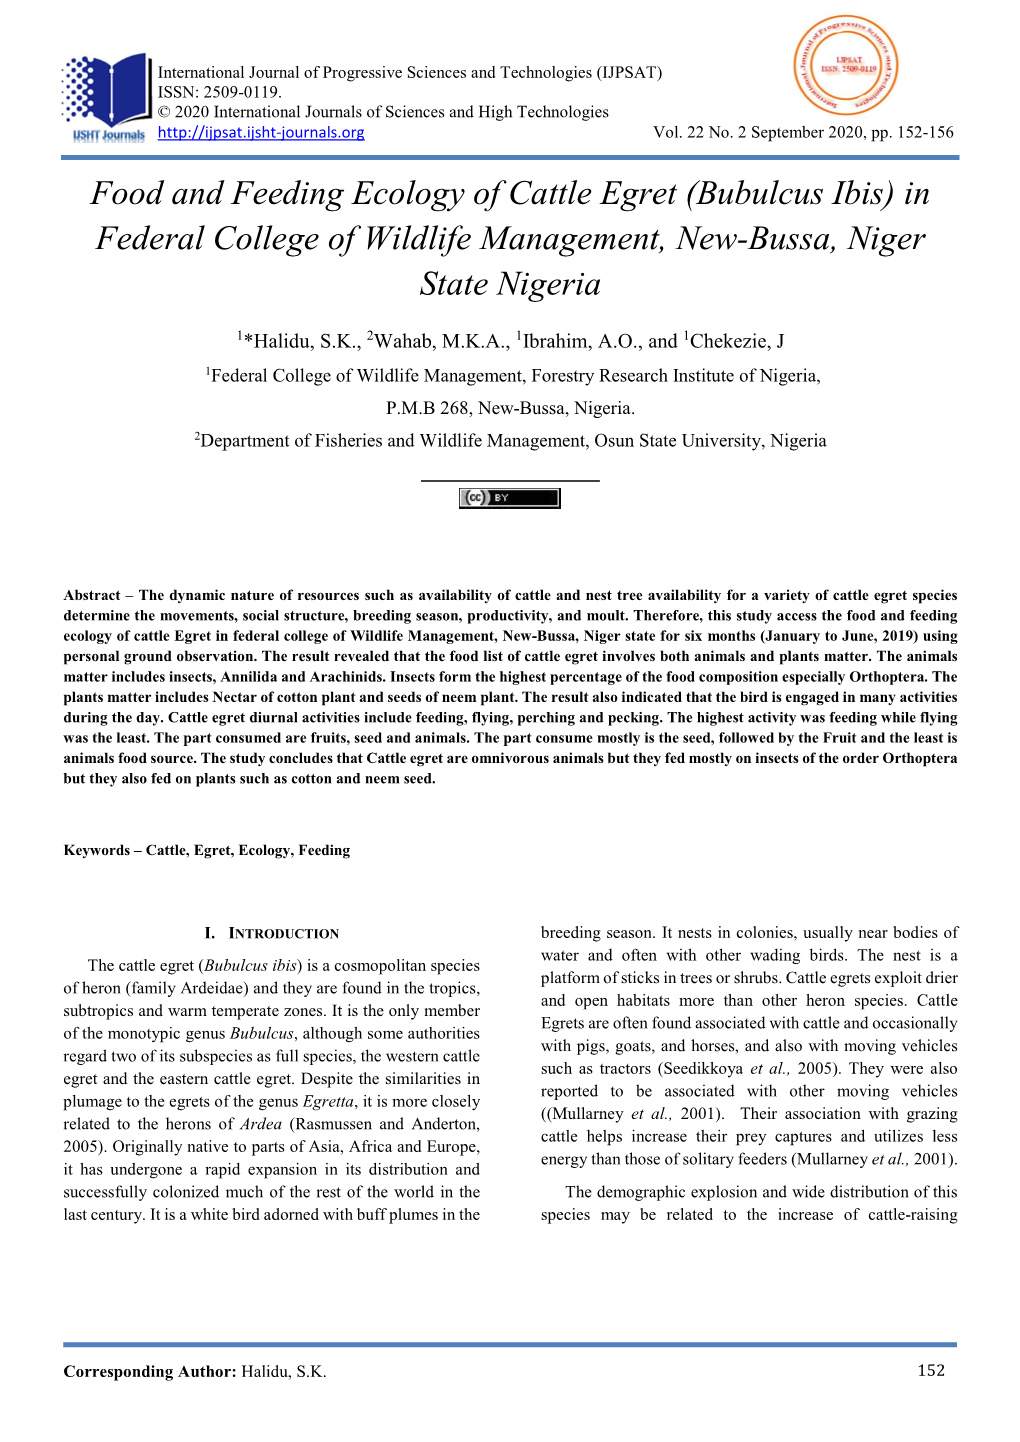 Food and Feeding Ecology of Cattle Egret (Bubulcus Ibis) in Federal College of Wildlife Management, New-Bussa, Niger State Nigeria